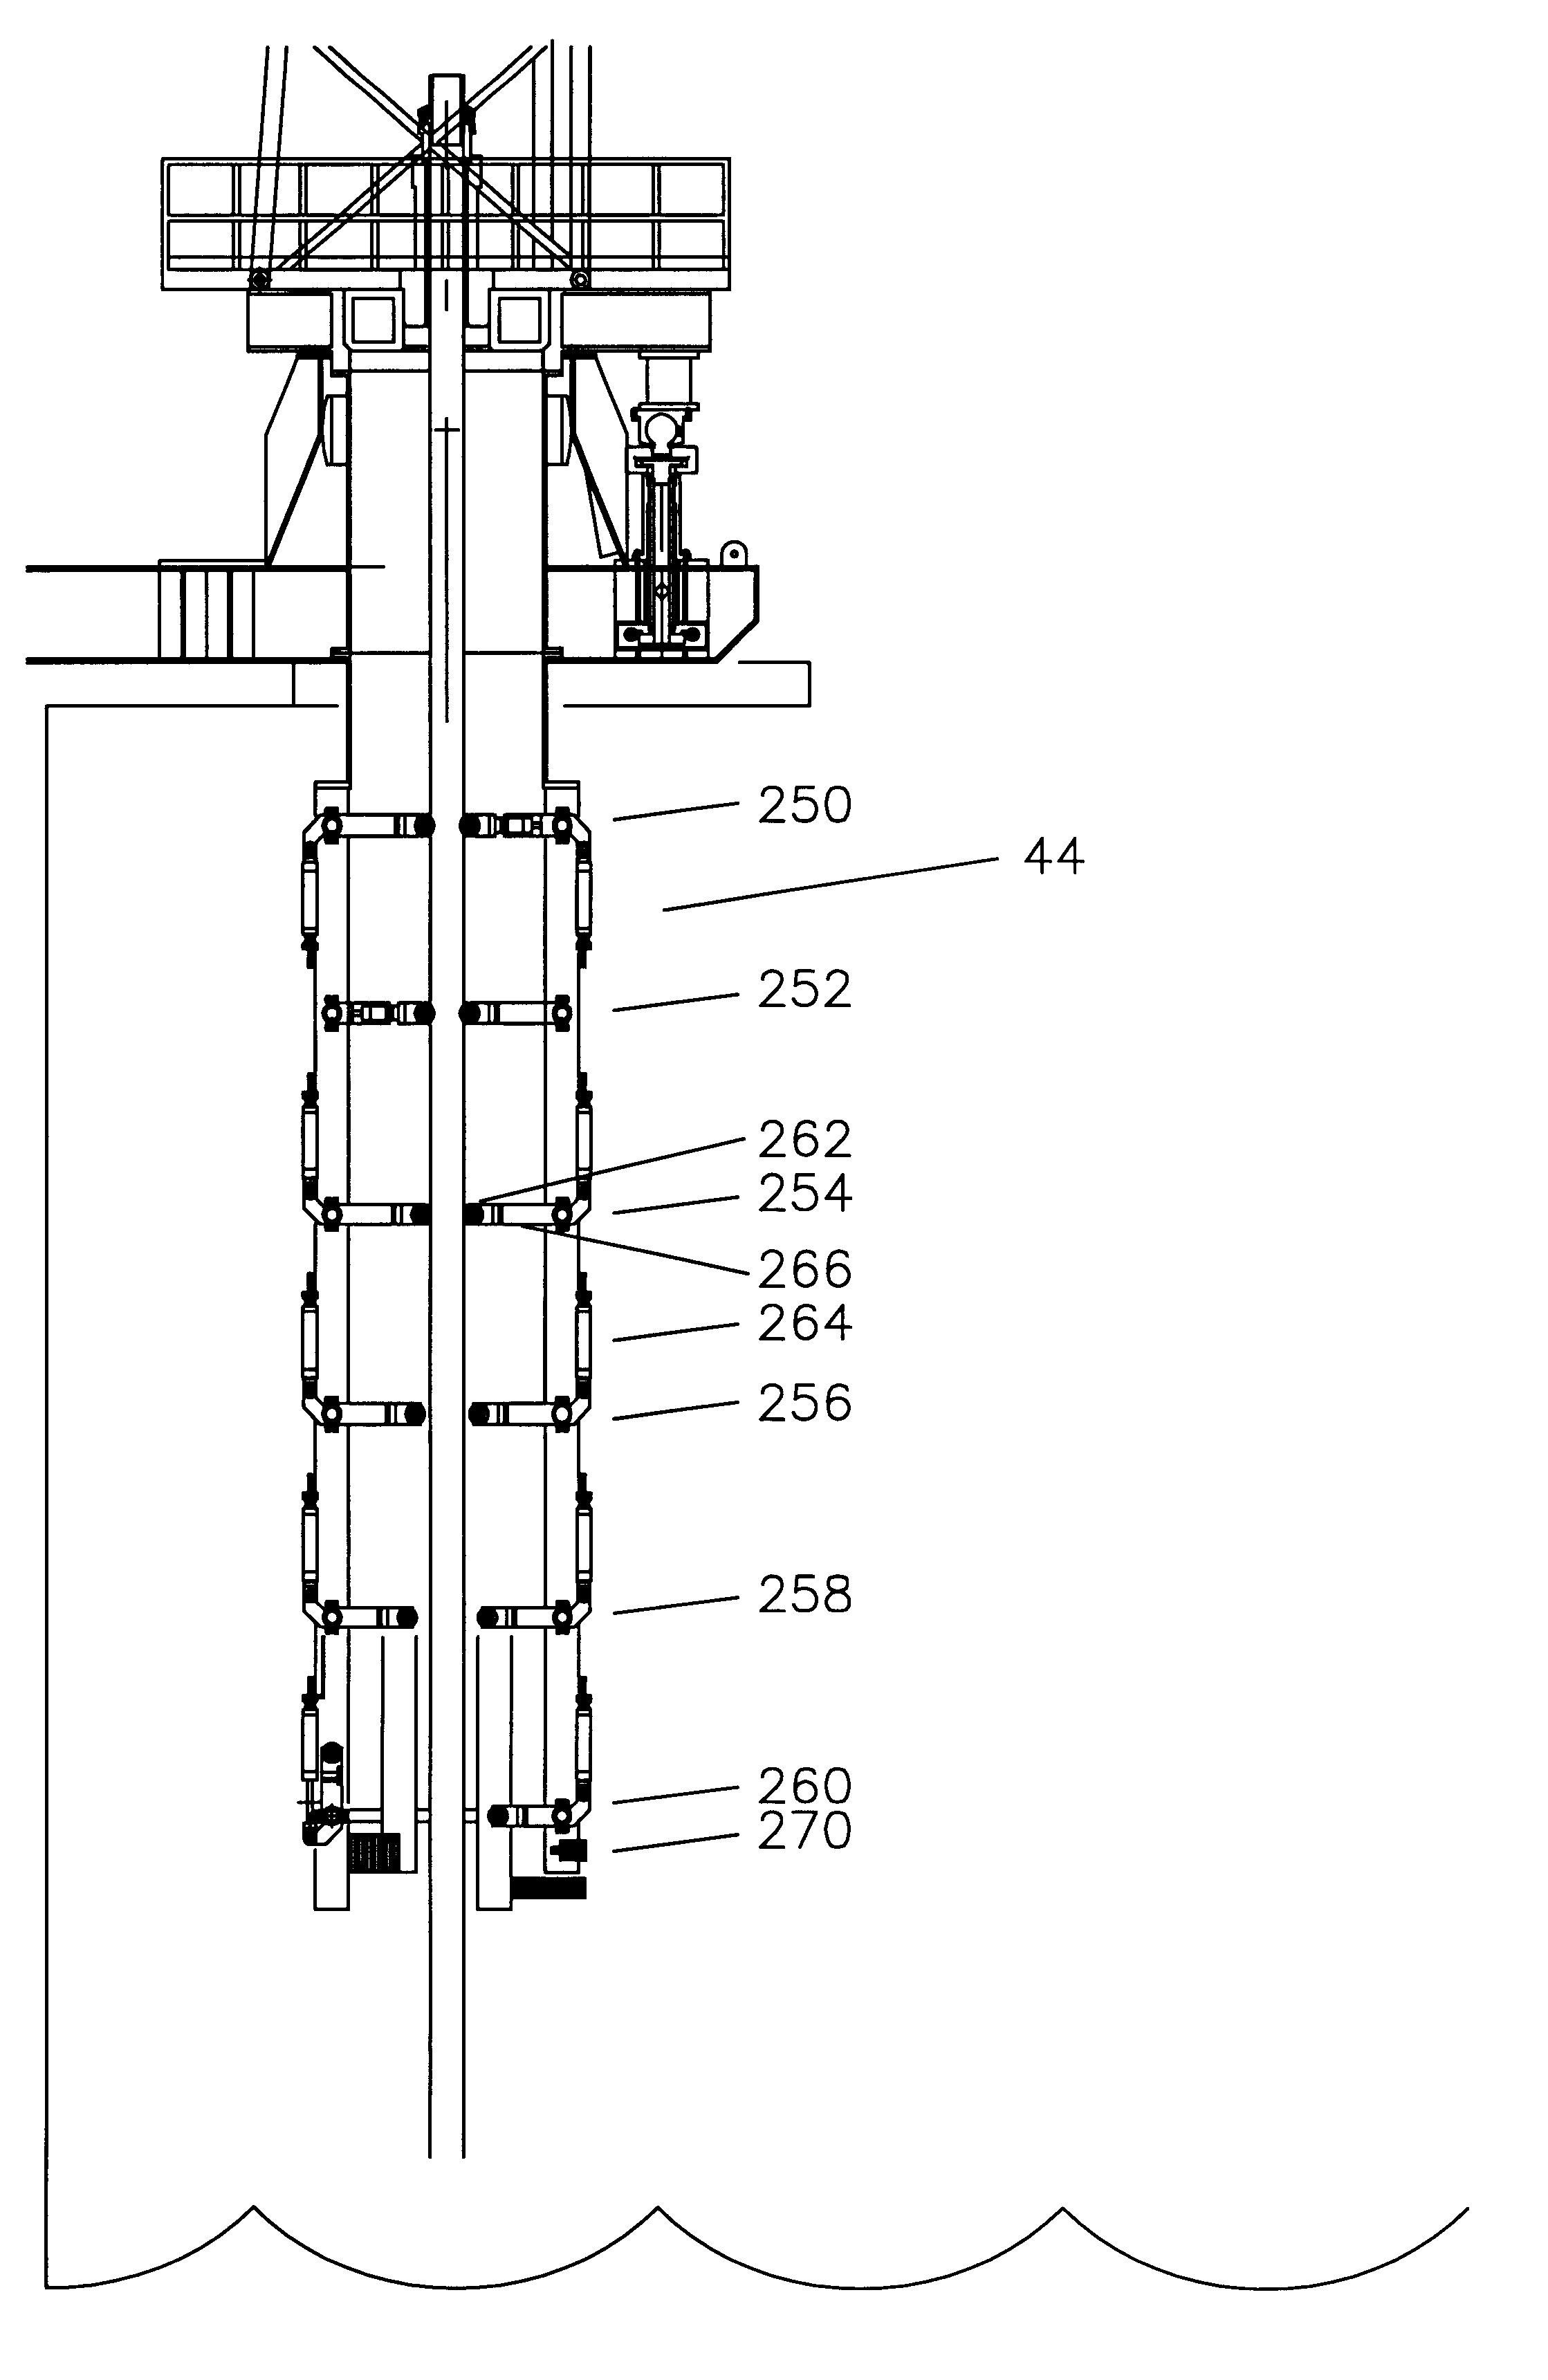 Stinger for J-Lay pipelaying system